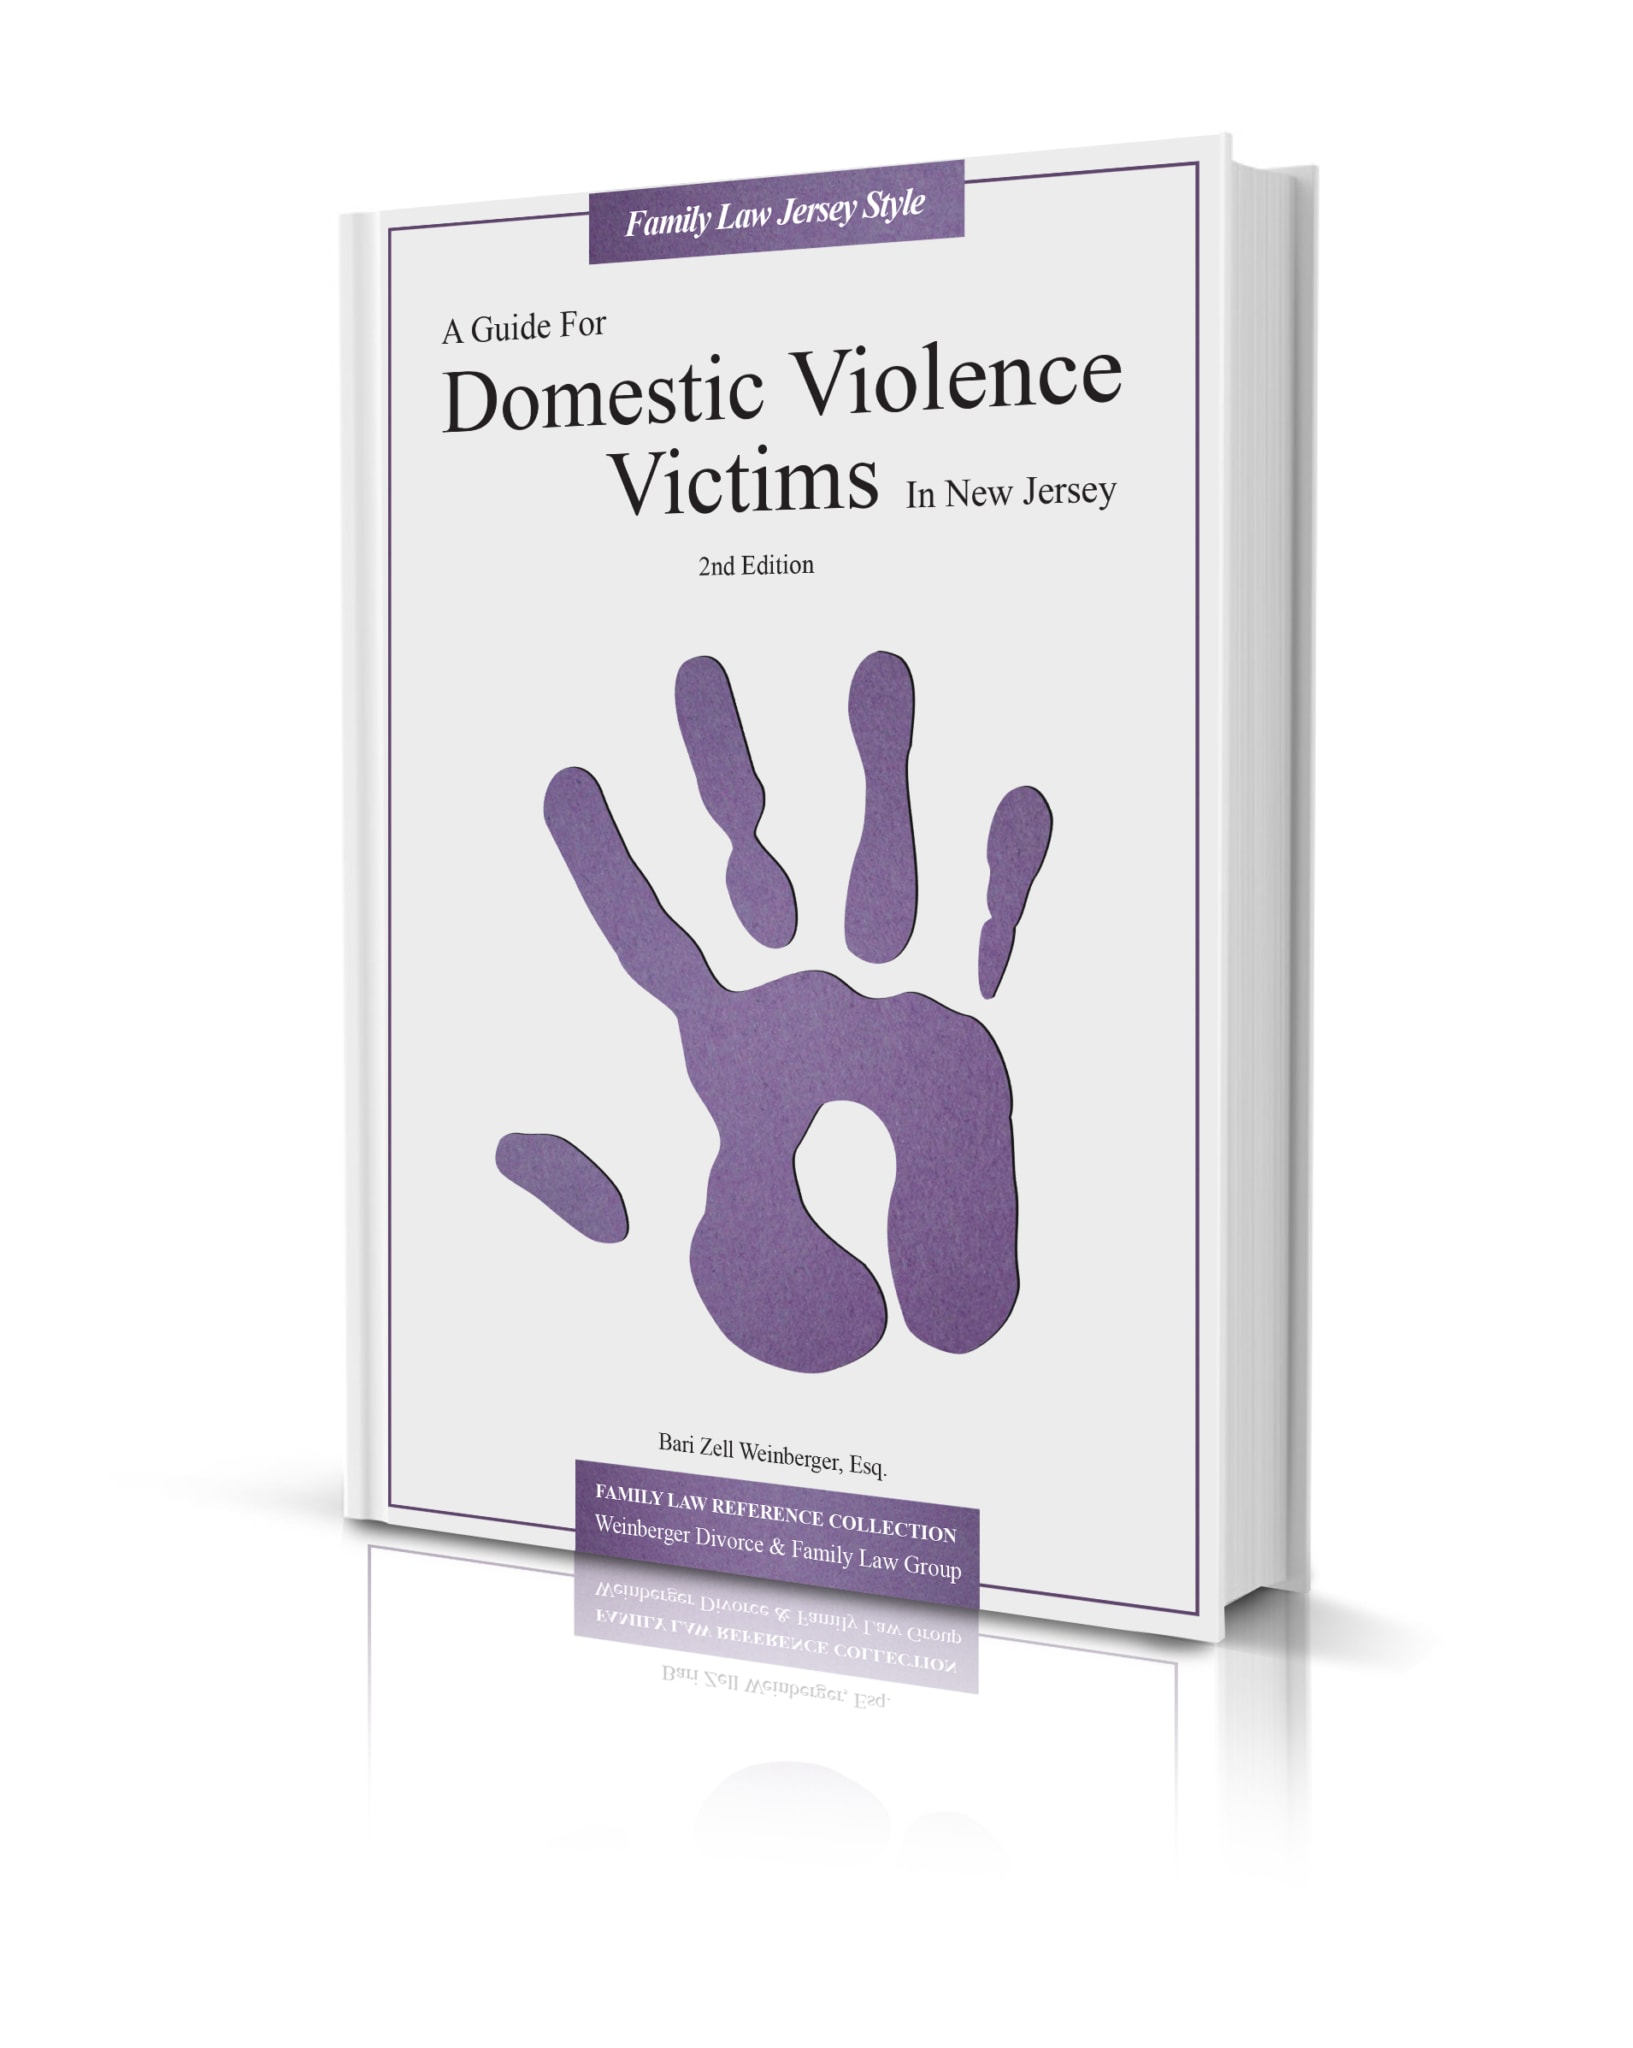 the violence project book review